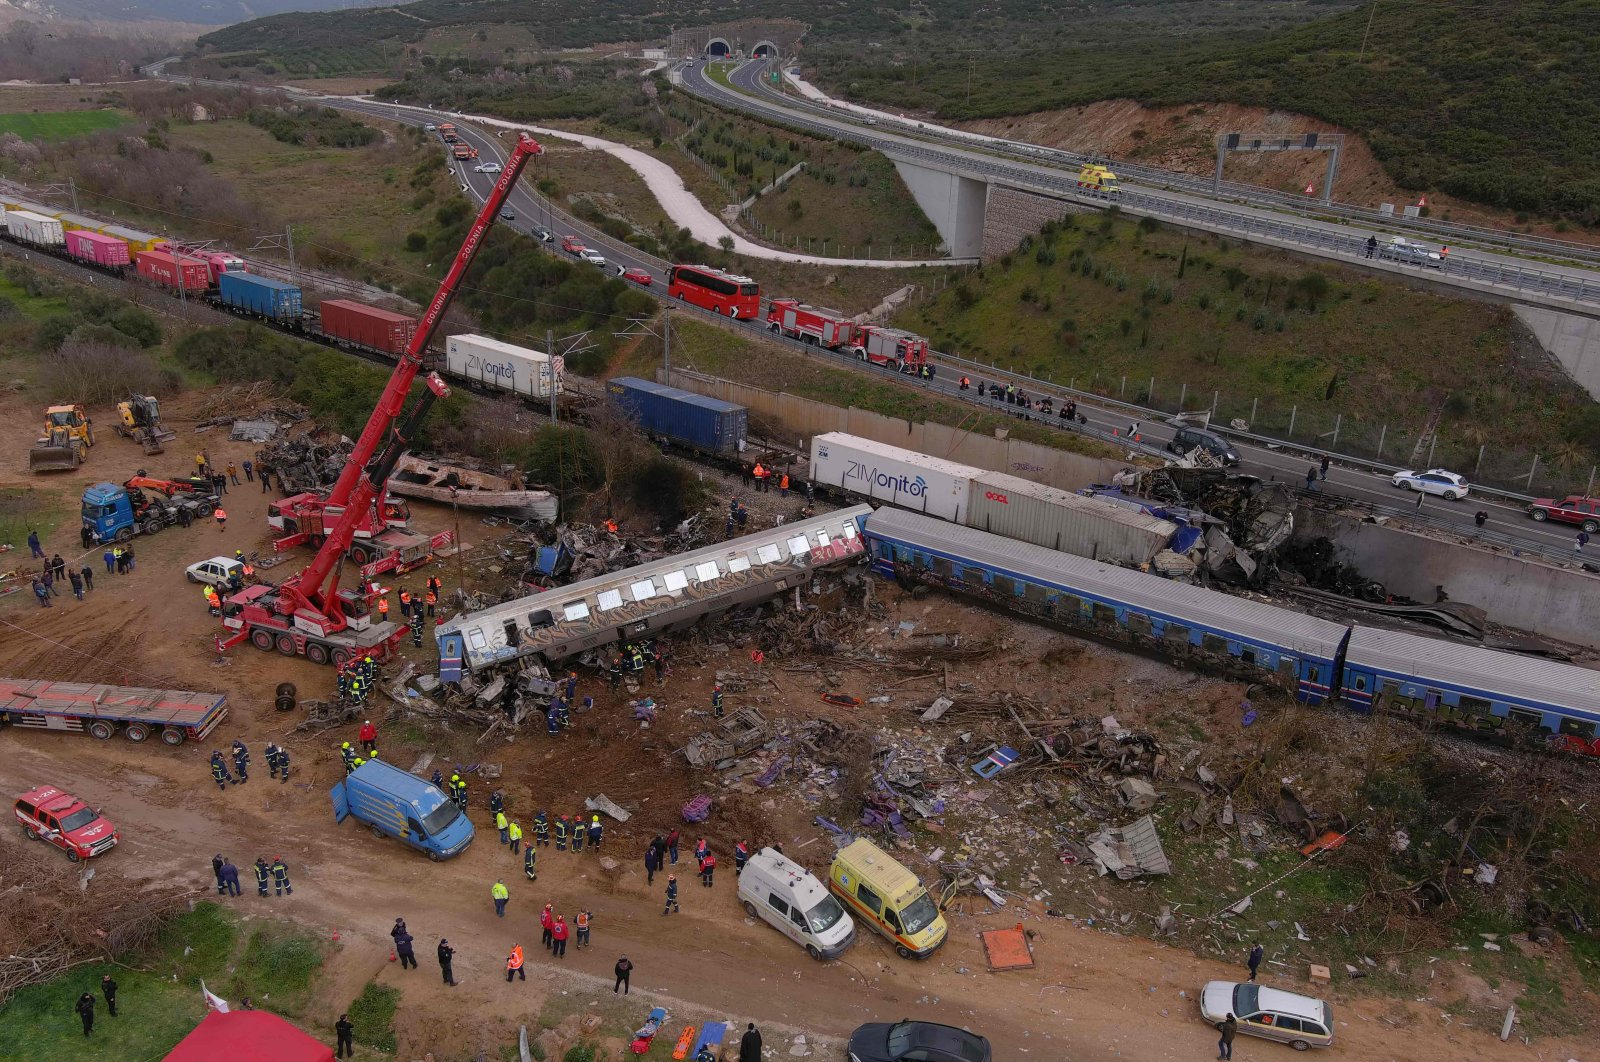 An aerial drone photograph shows emergency crews examining the wreckage after a train accident in the Tempi Valley near Larissa, Greece, March 1, 2023. (AFP Photo)